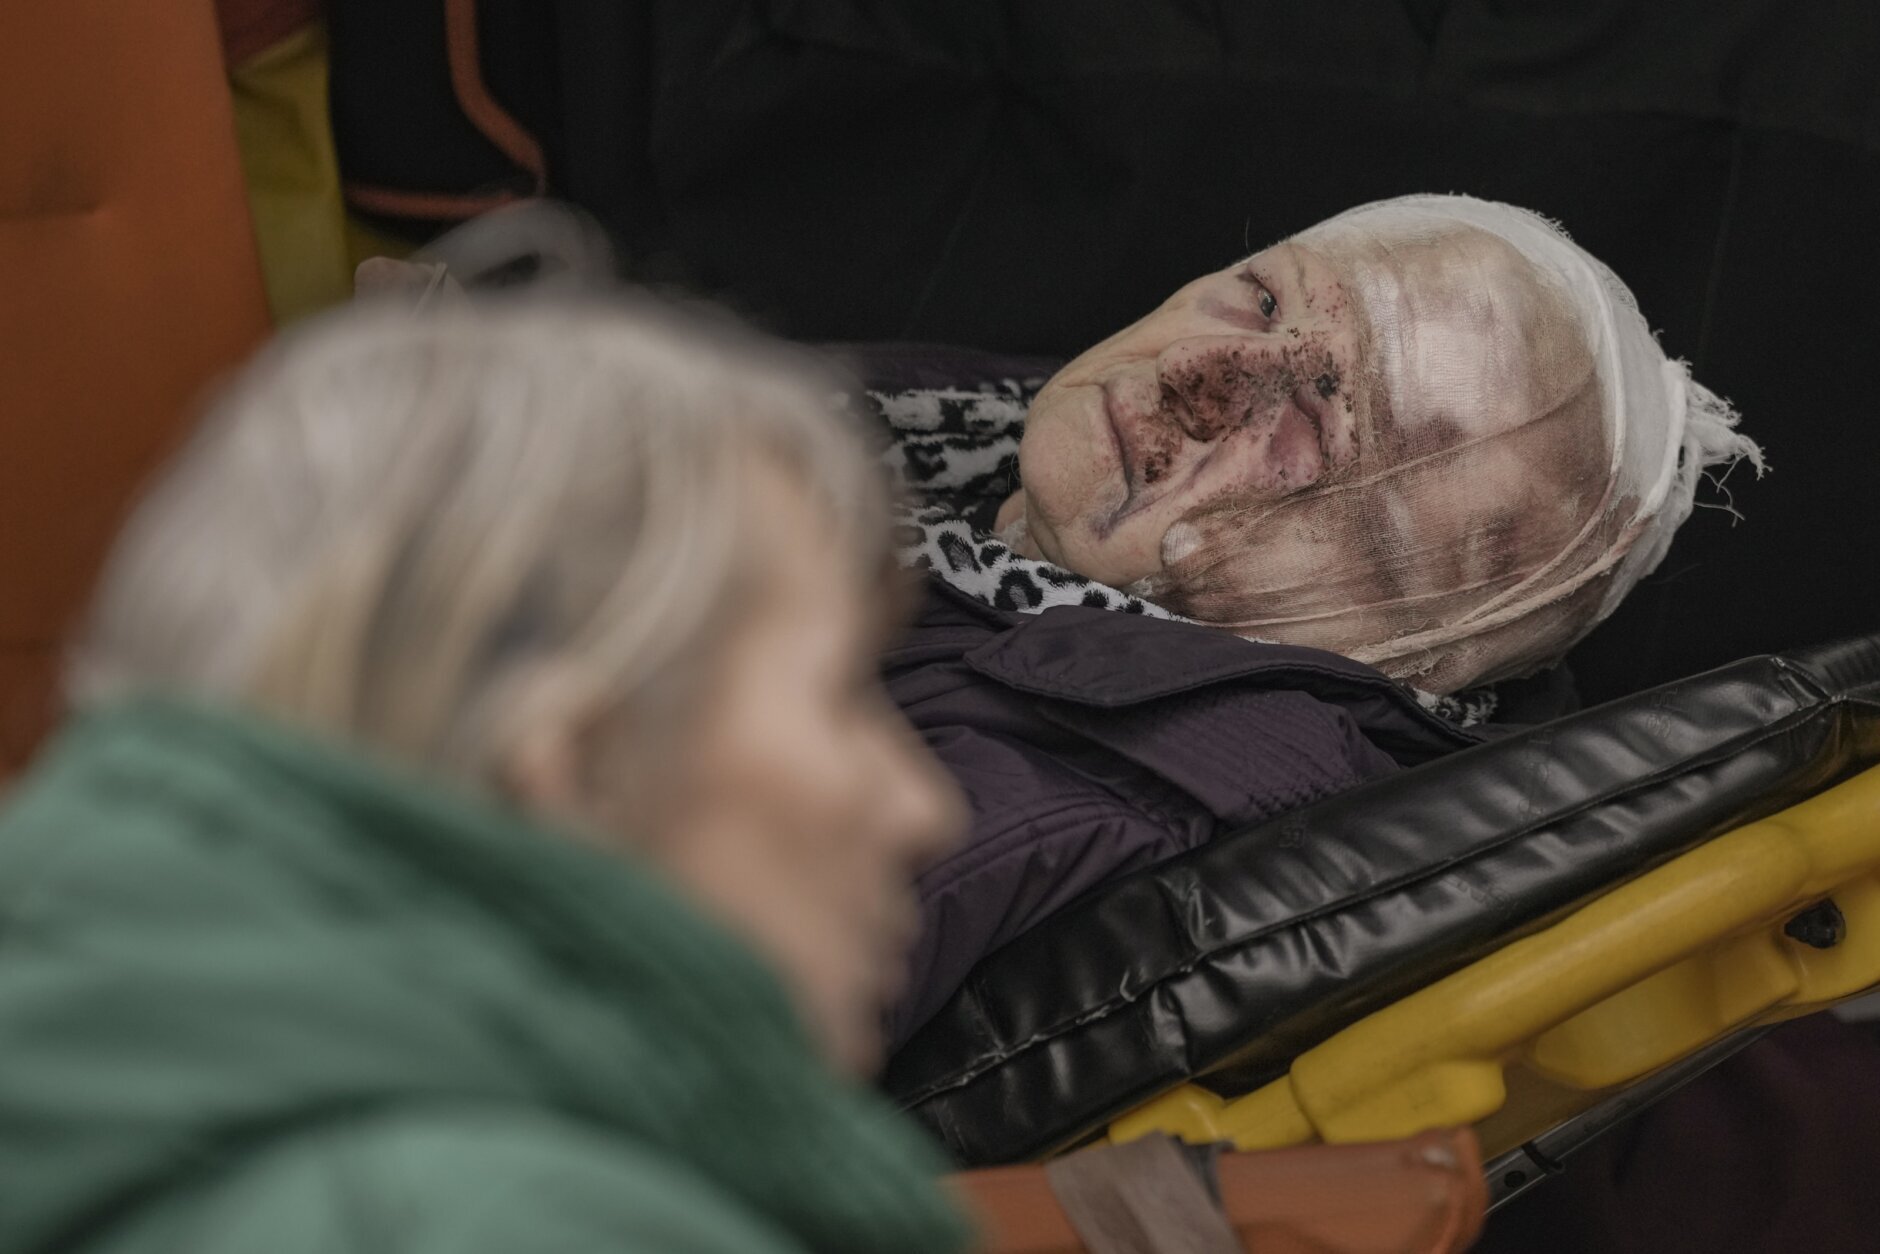 An injured woman evacuated from Irpin lies on a stretcher in an ambulance on the outskirts of Kyiv, Ukraine, Saturday, March 26, 2022. (AP Photo/Vadim Ghirda)